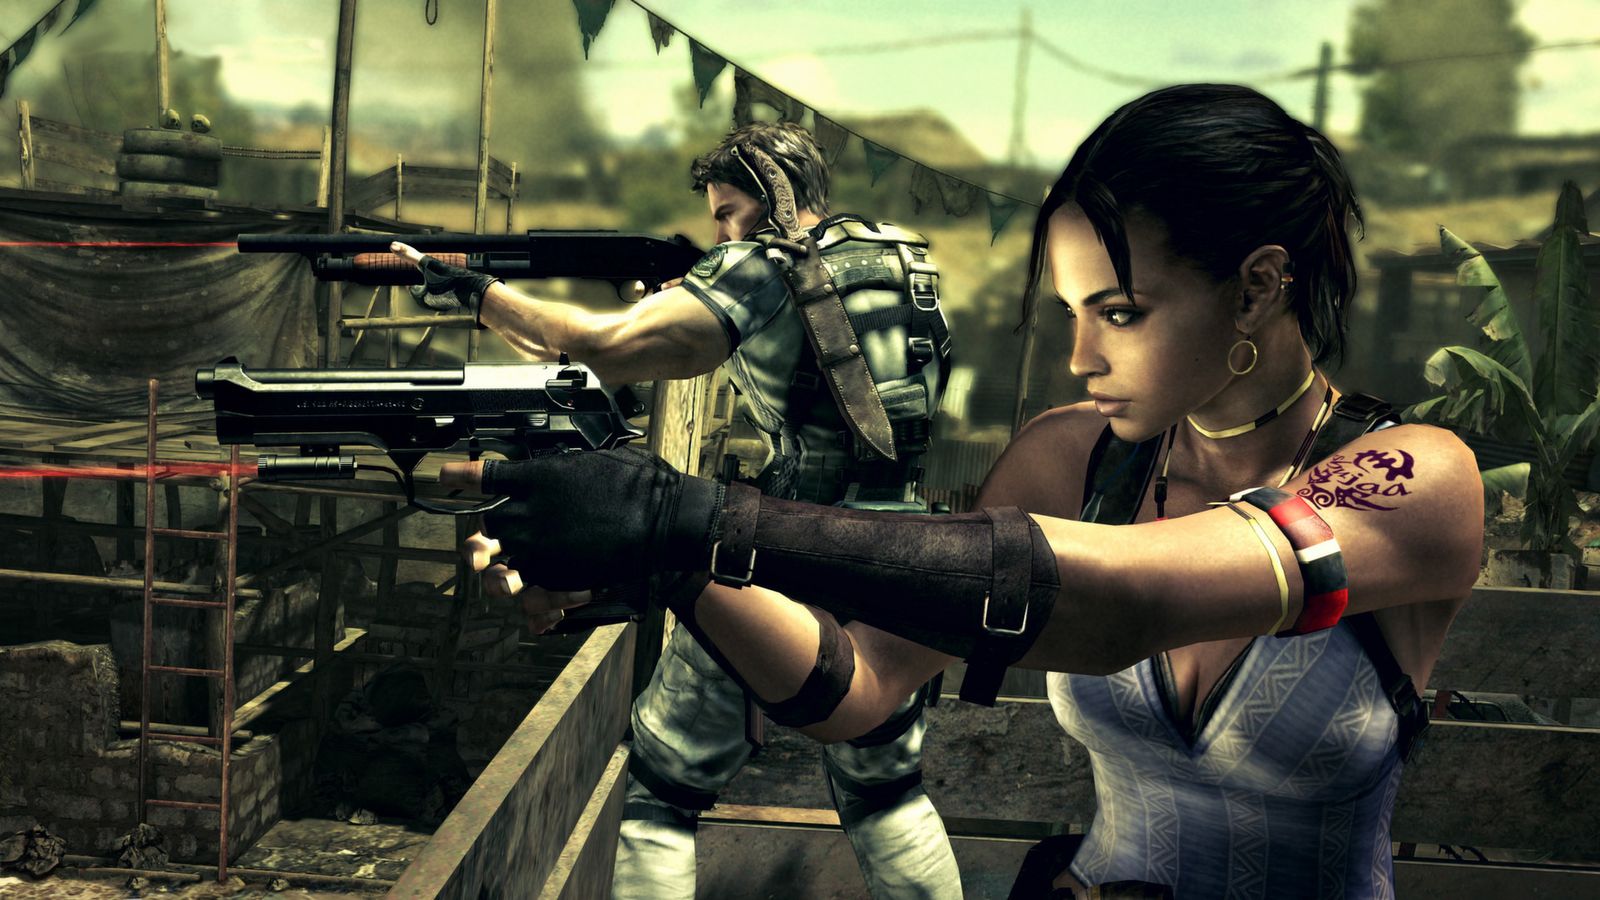 Xbox Games With Gold May 2021 Resident Evil 5
